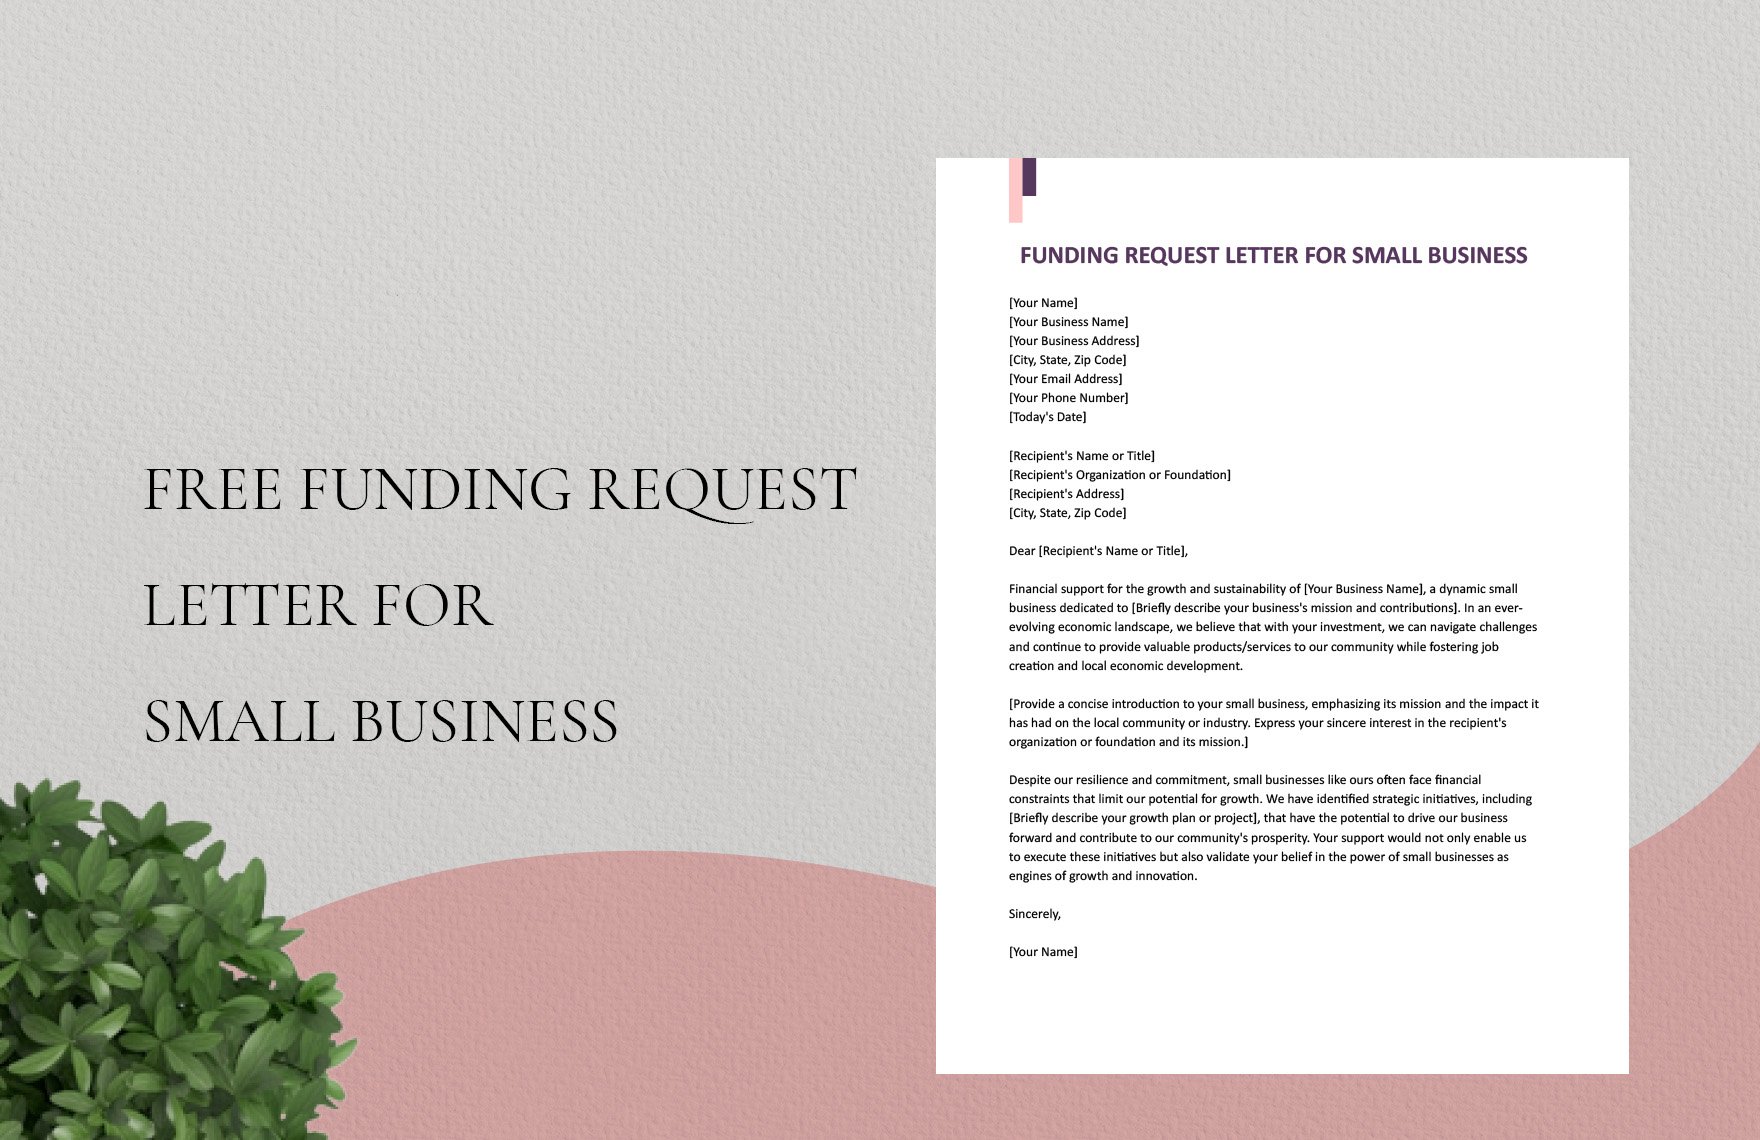 Funding Request Letter For Small Business